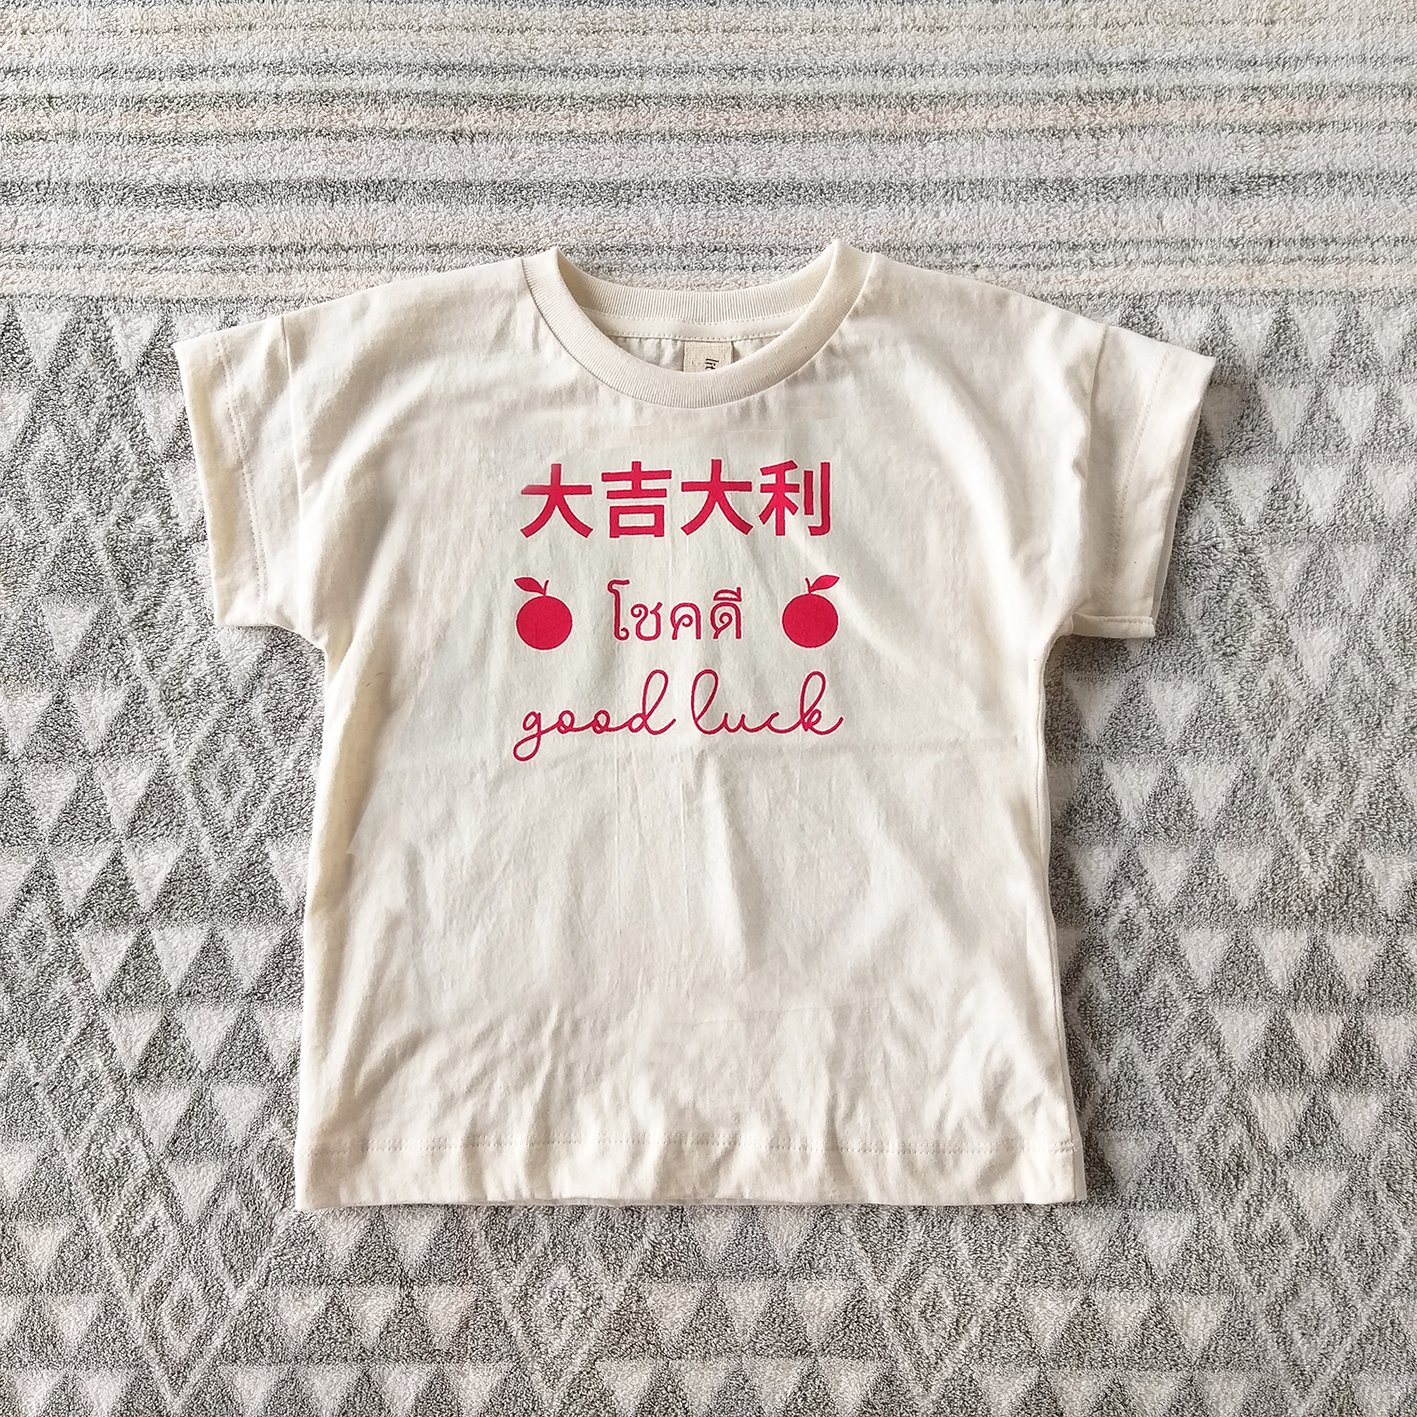 CNY FOR GOOD LUCK KIDS LOOSE FIT SHIRTS / 100% RAW COTTON CREAM